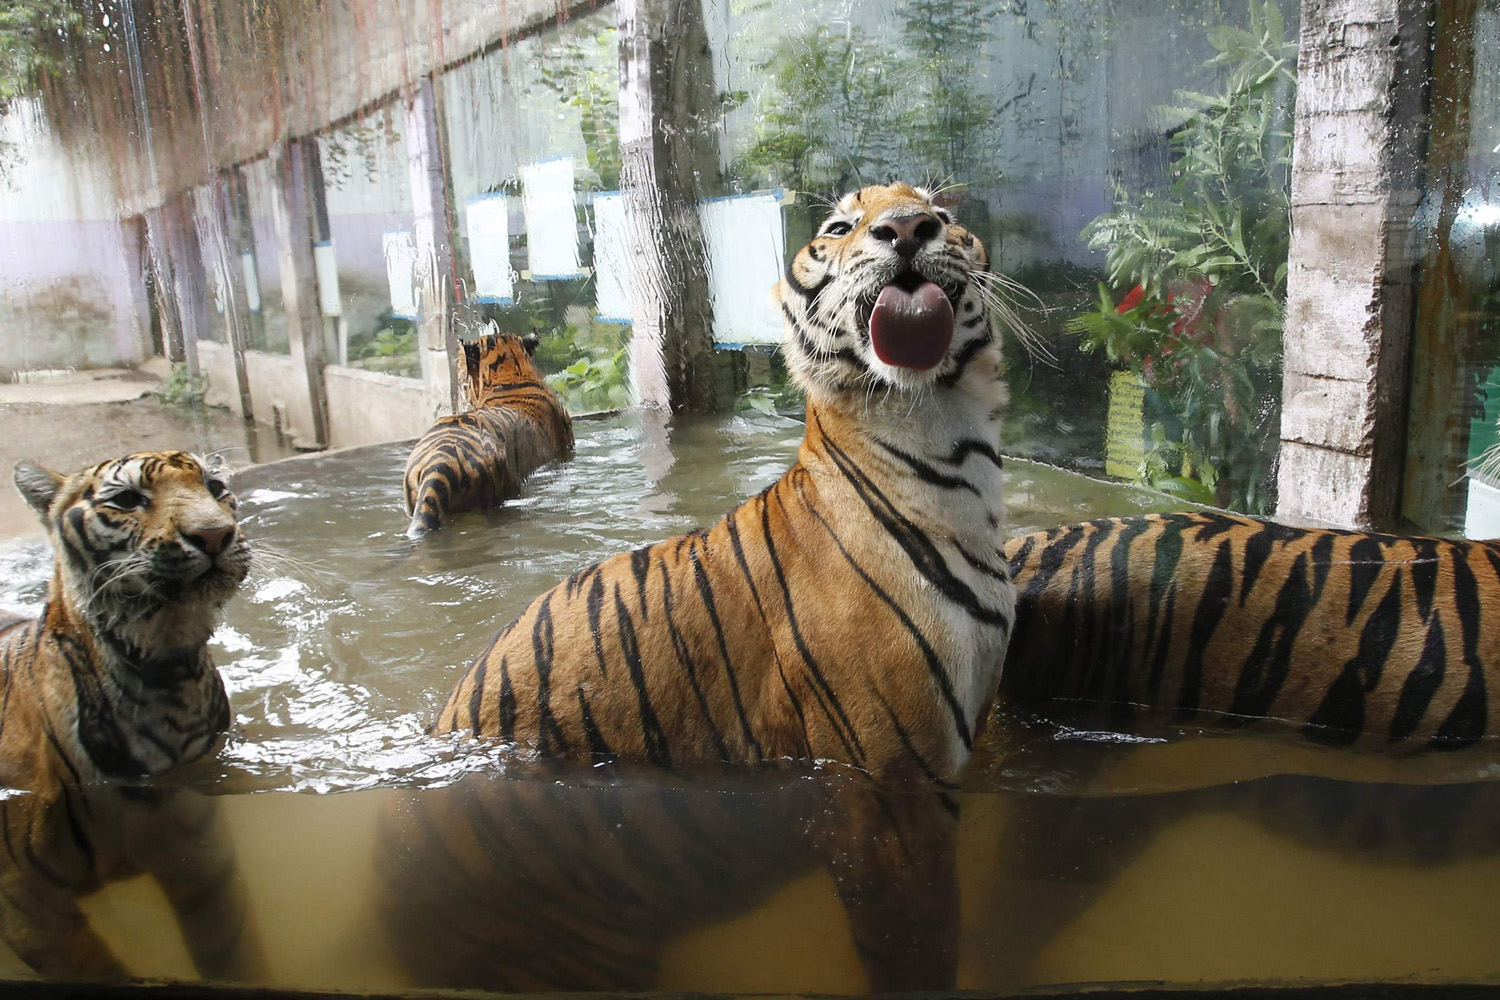 Bengal tigers play in a pool of water at the zoo in Malabon, Philippines on July 11, 2014.